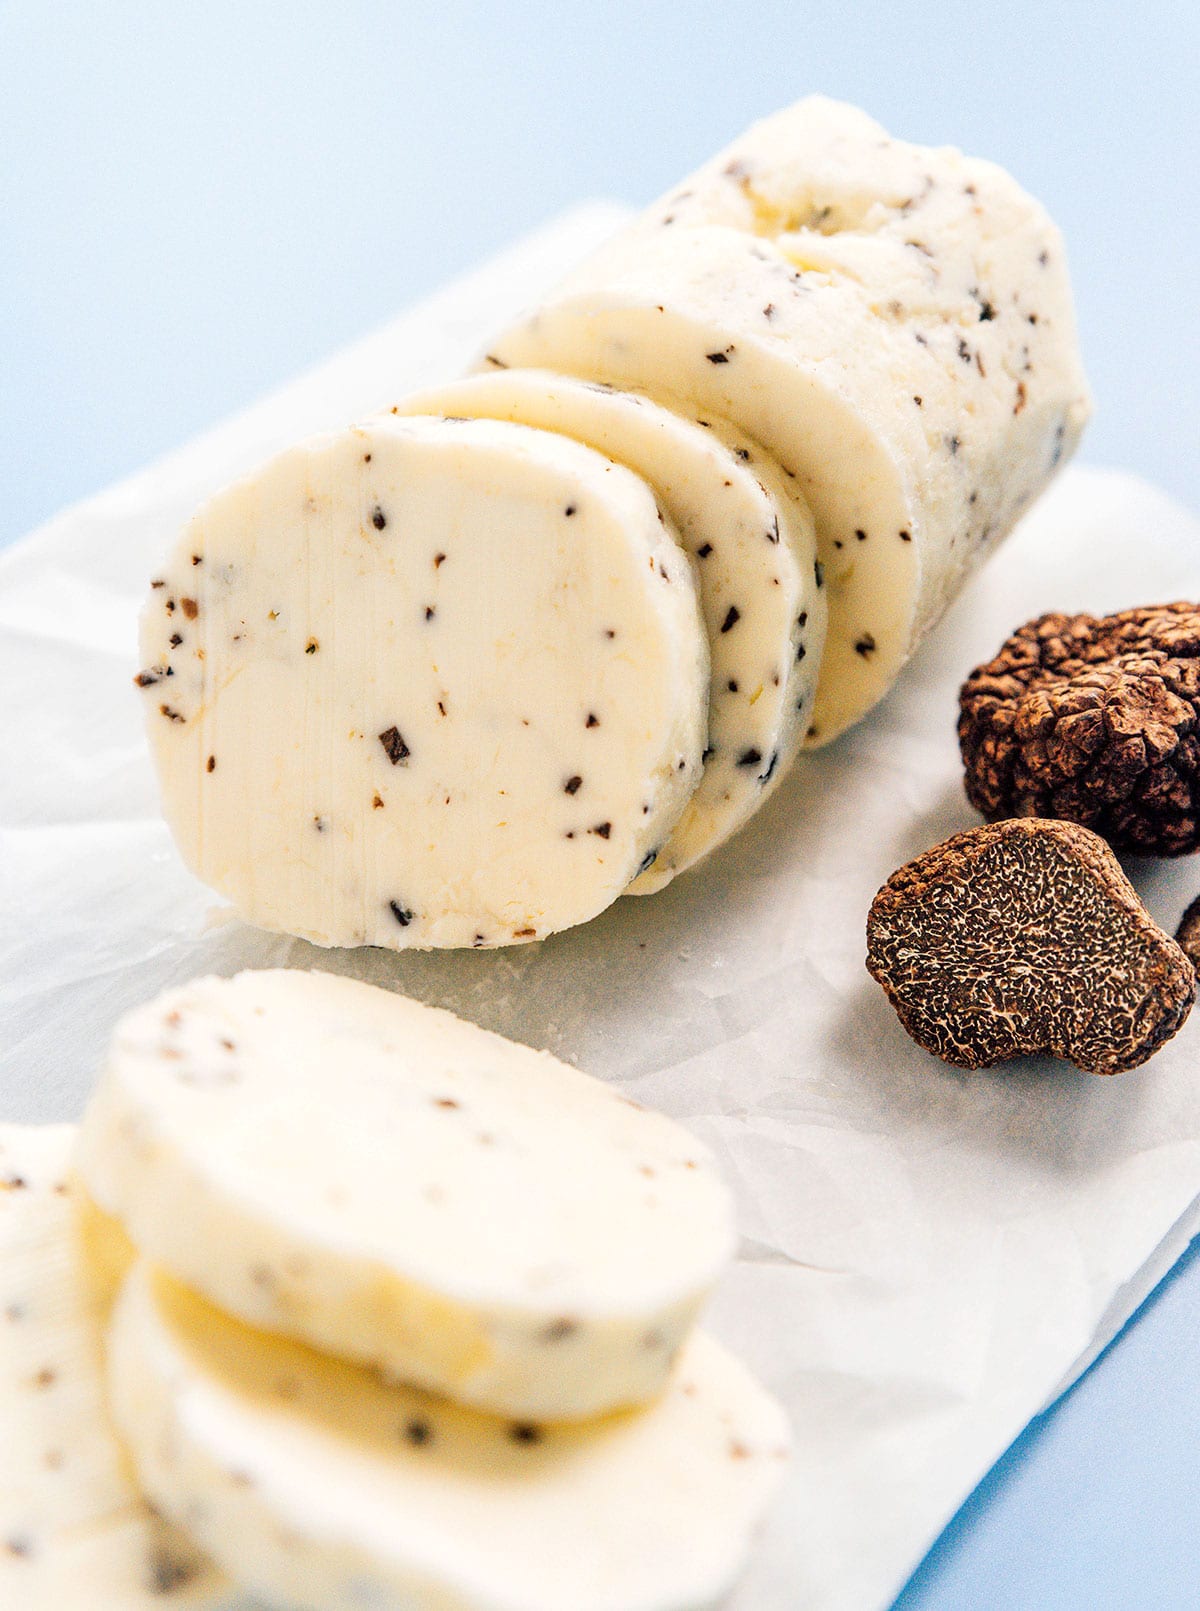 Black truffle butter sitting on top of a piece of parchment paper with a couple of black truffles